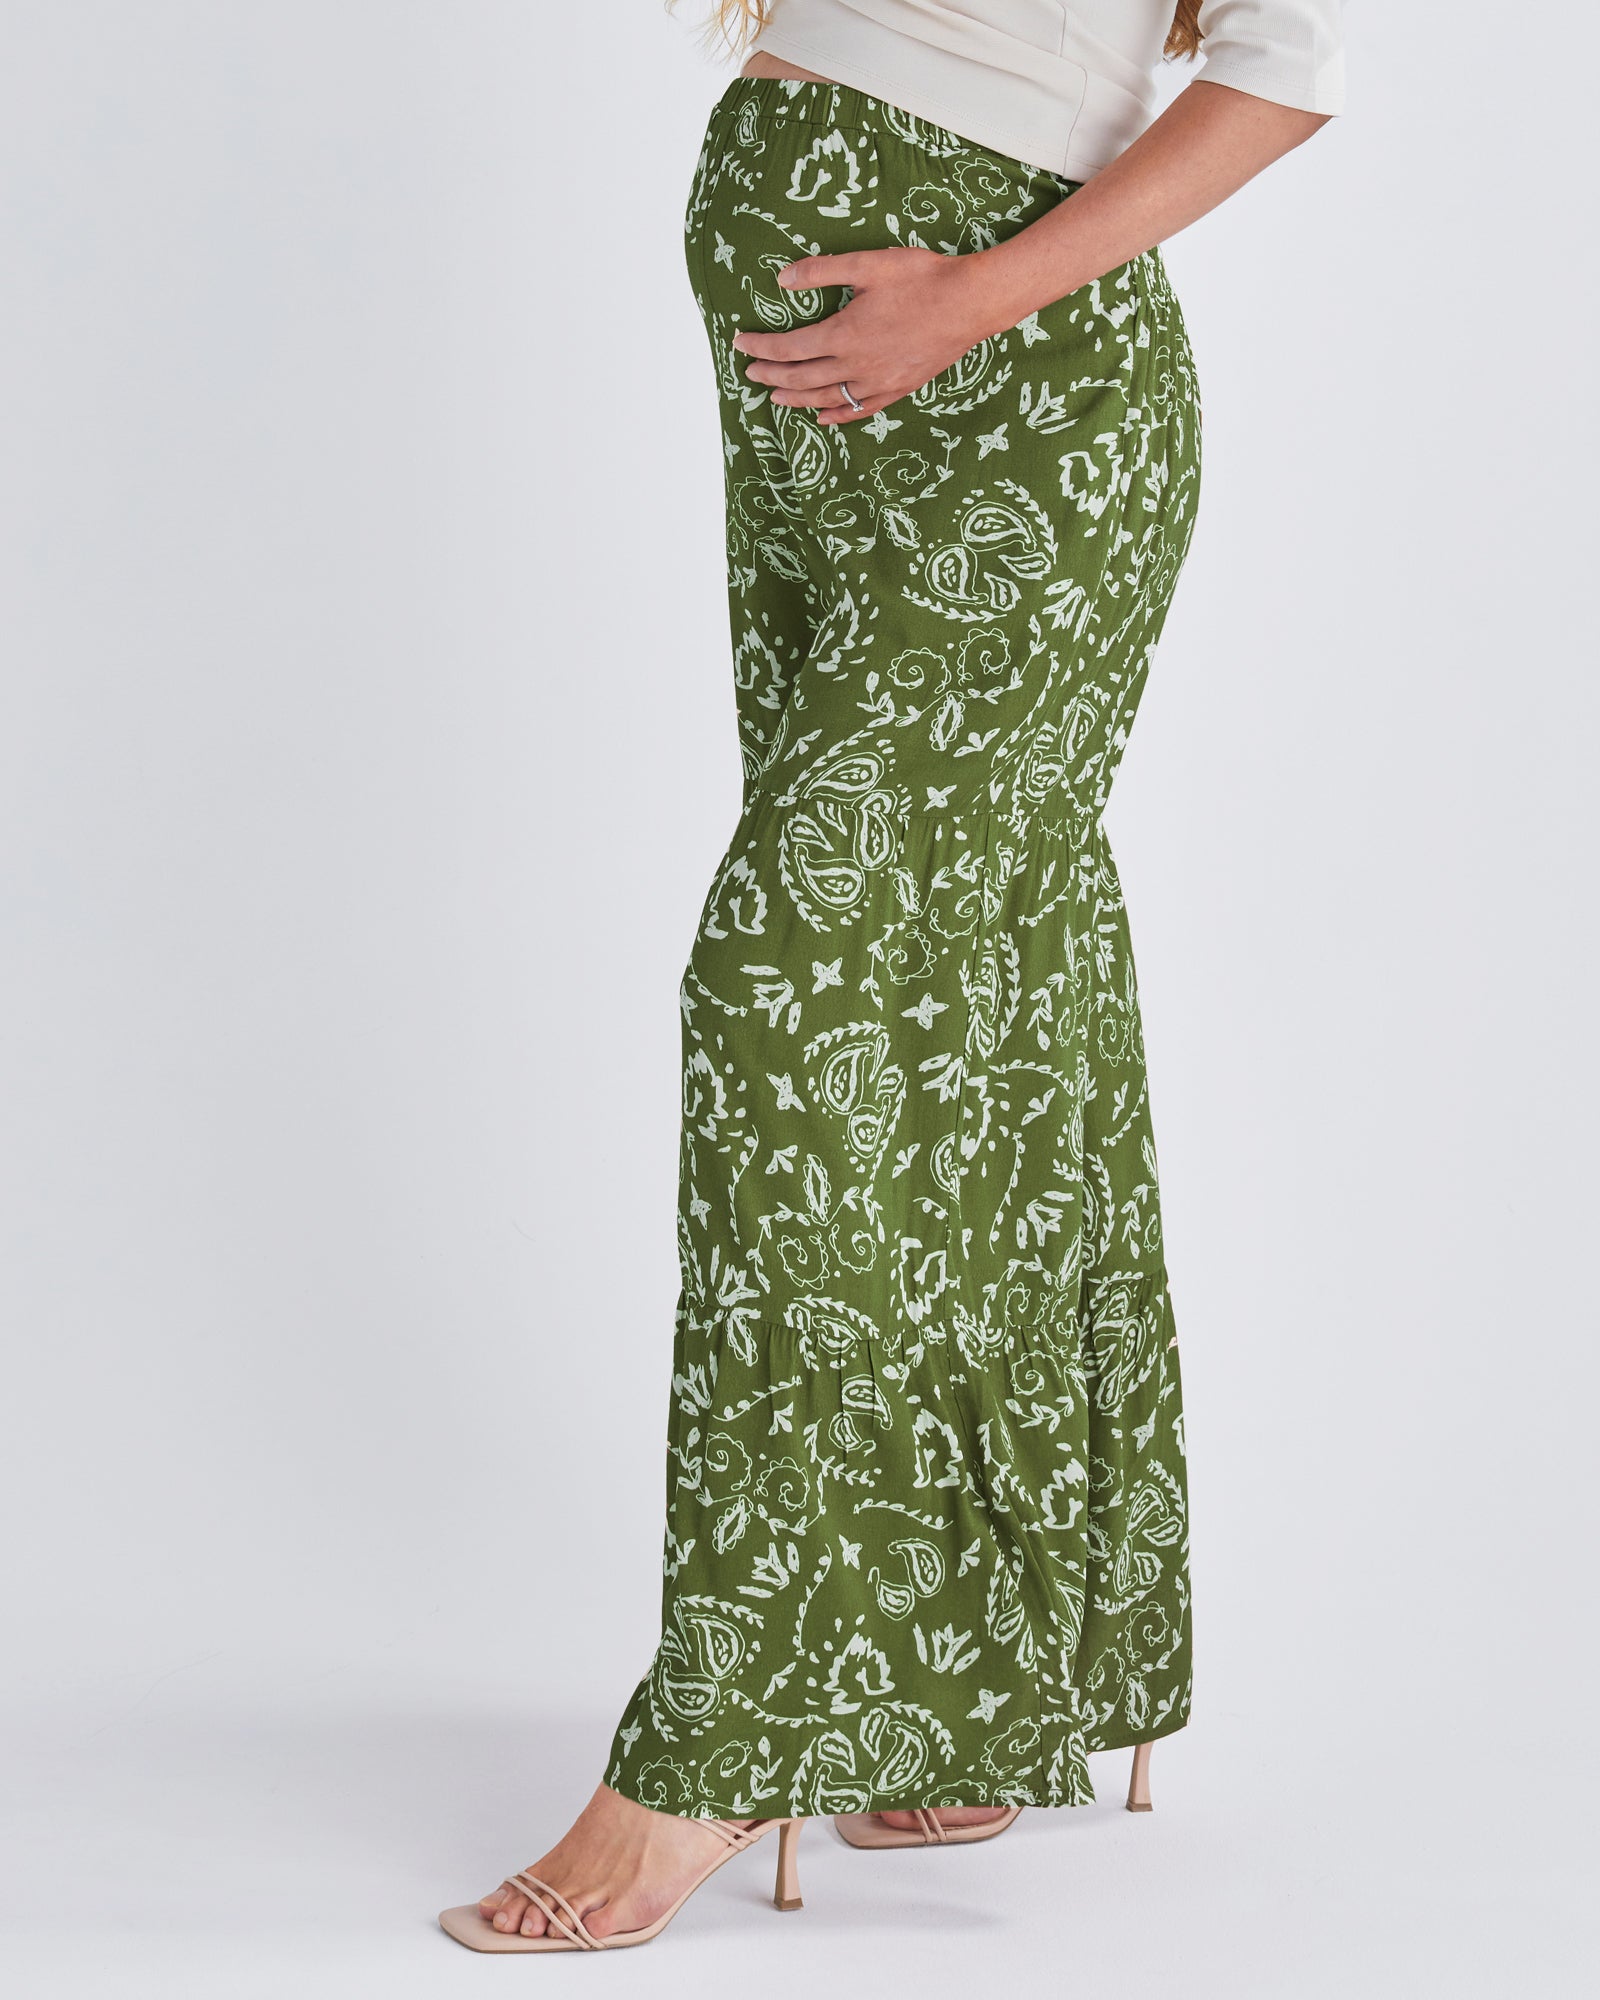 Side View - A pregnant Woman Wearing Stacie Wide Leg Green Maternity Pants in Paisley Print from Angel Maternity